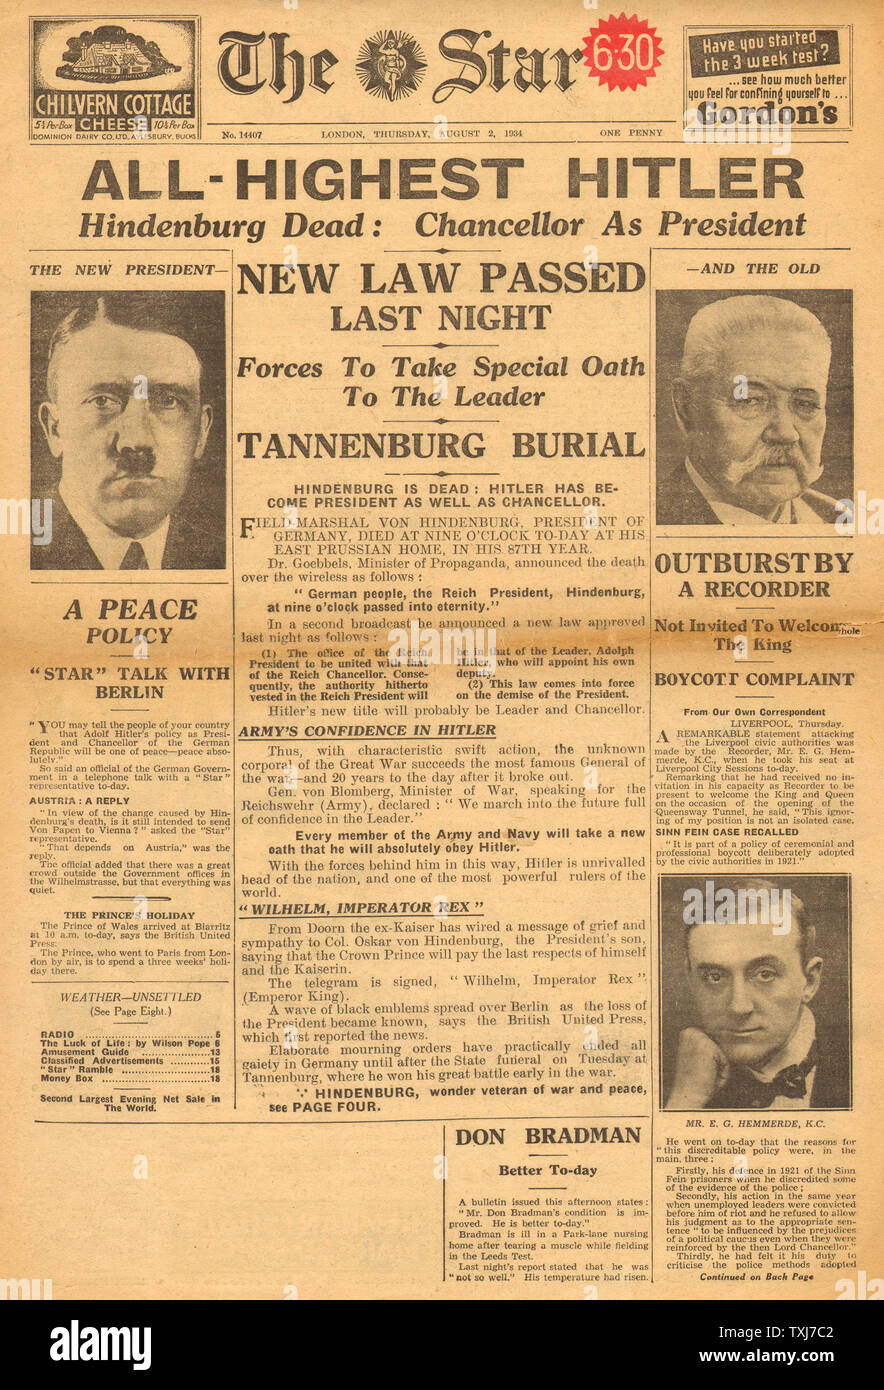 1934 The Star front page reporting Hindenburg Dead & Adolf Hitler President Stock Photo